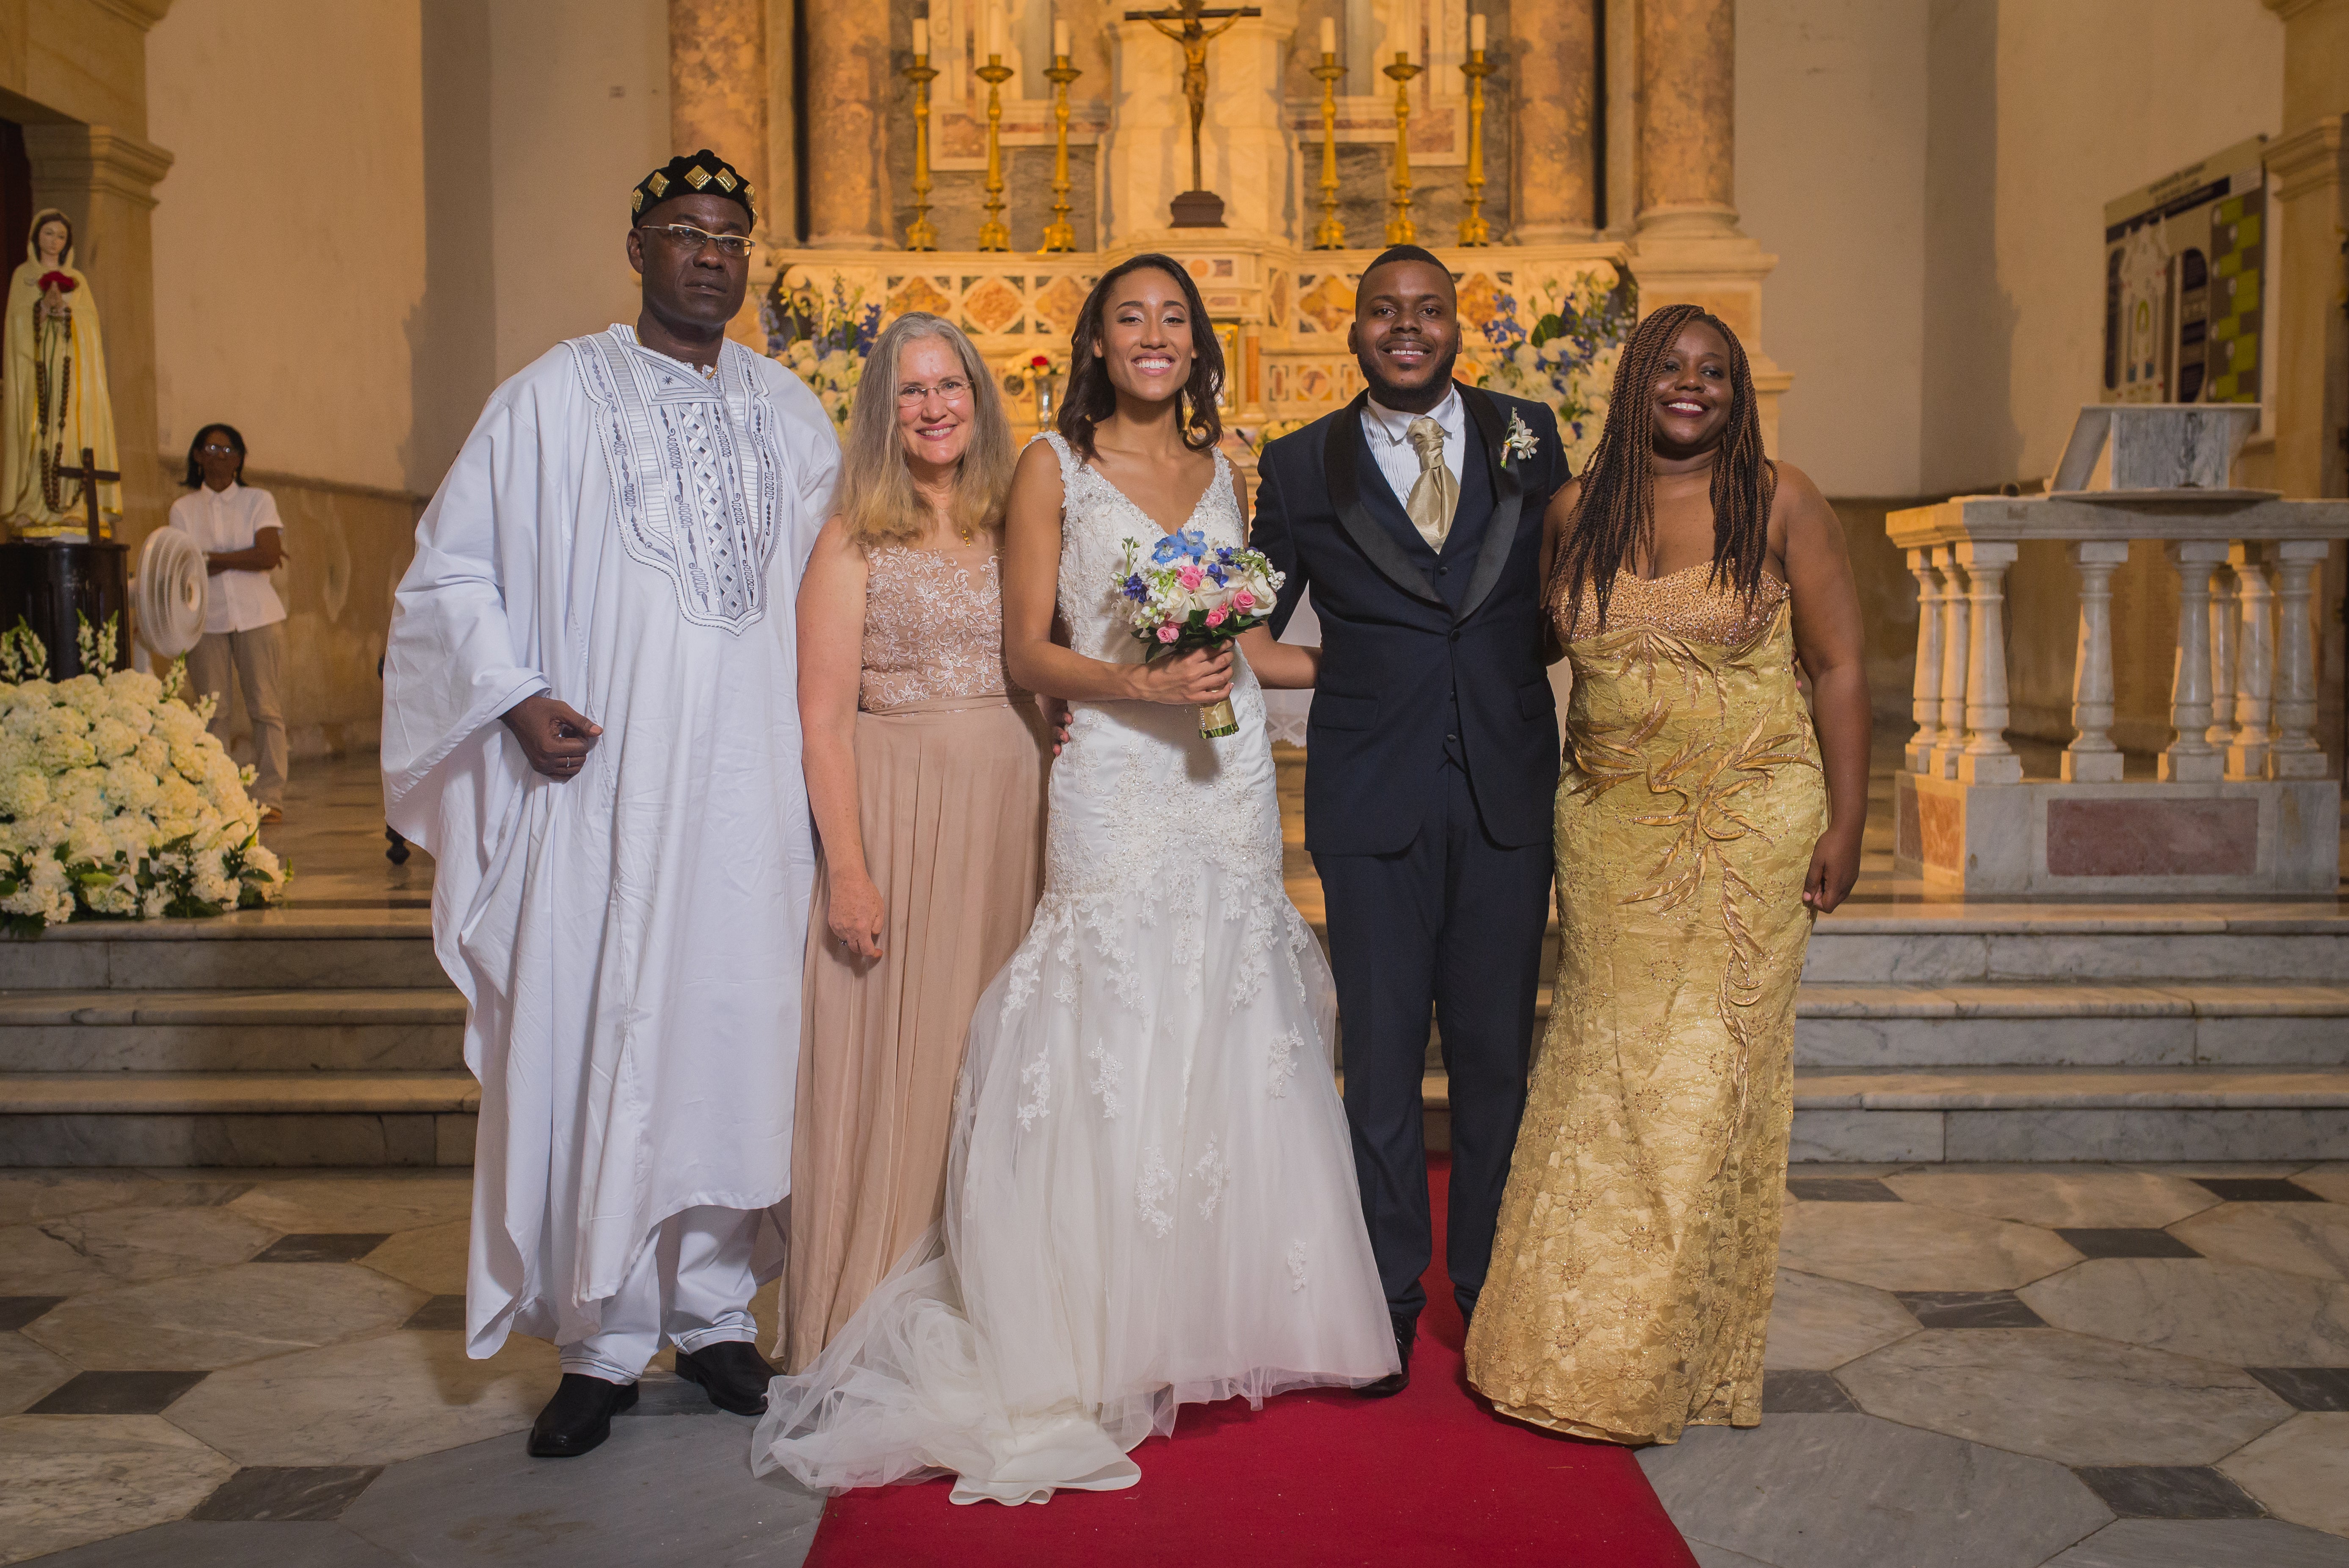 Bridal Bliss: Stockton, California Mayor Michael Tubbs And His Wife Anna's Wedding Was A Beautiful Mix Of American And Ghanaian Culture
